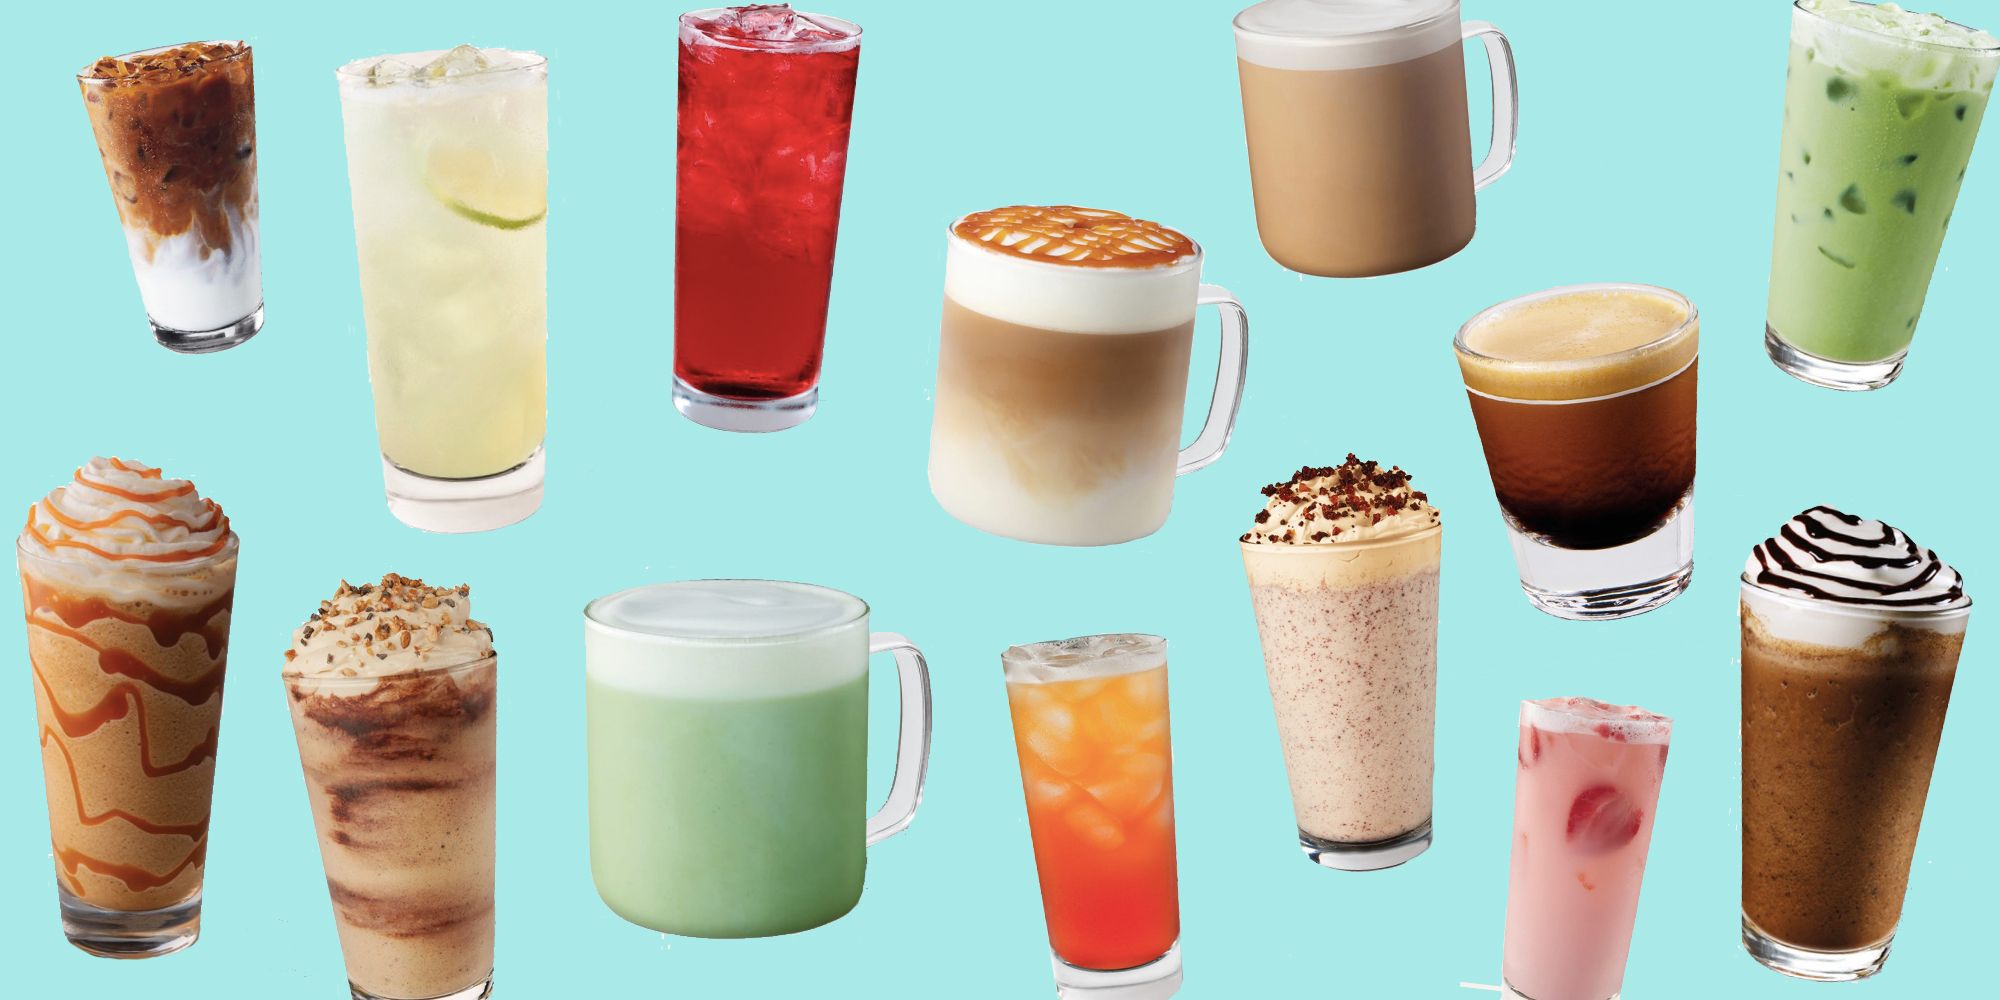 starbucks drinks without coffee uk